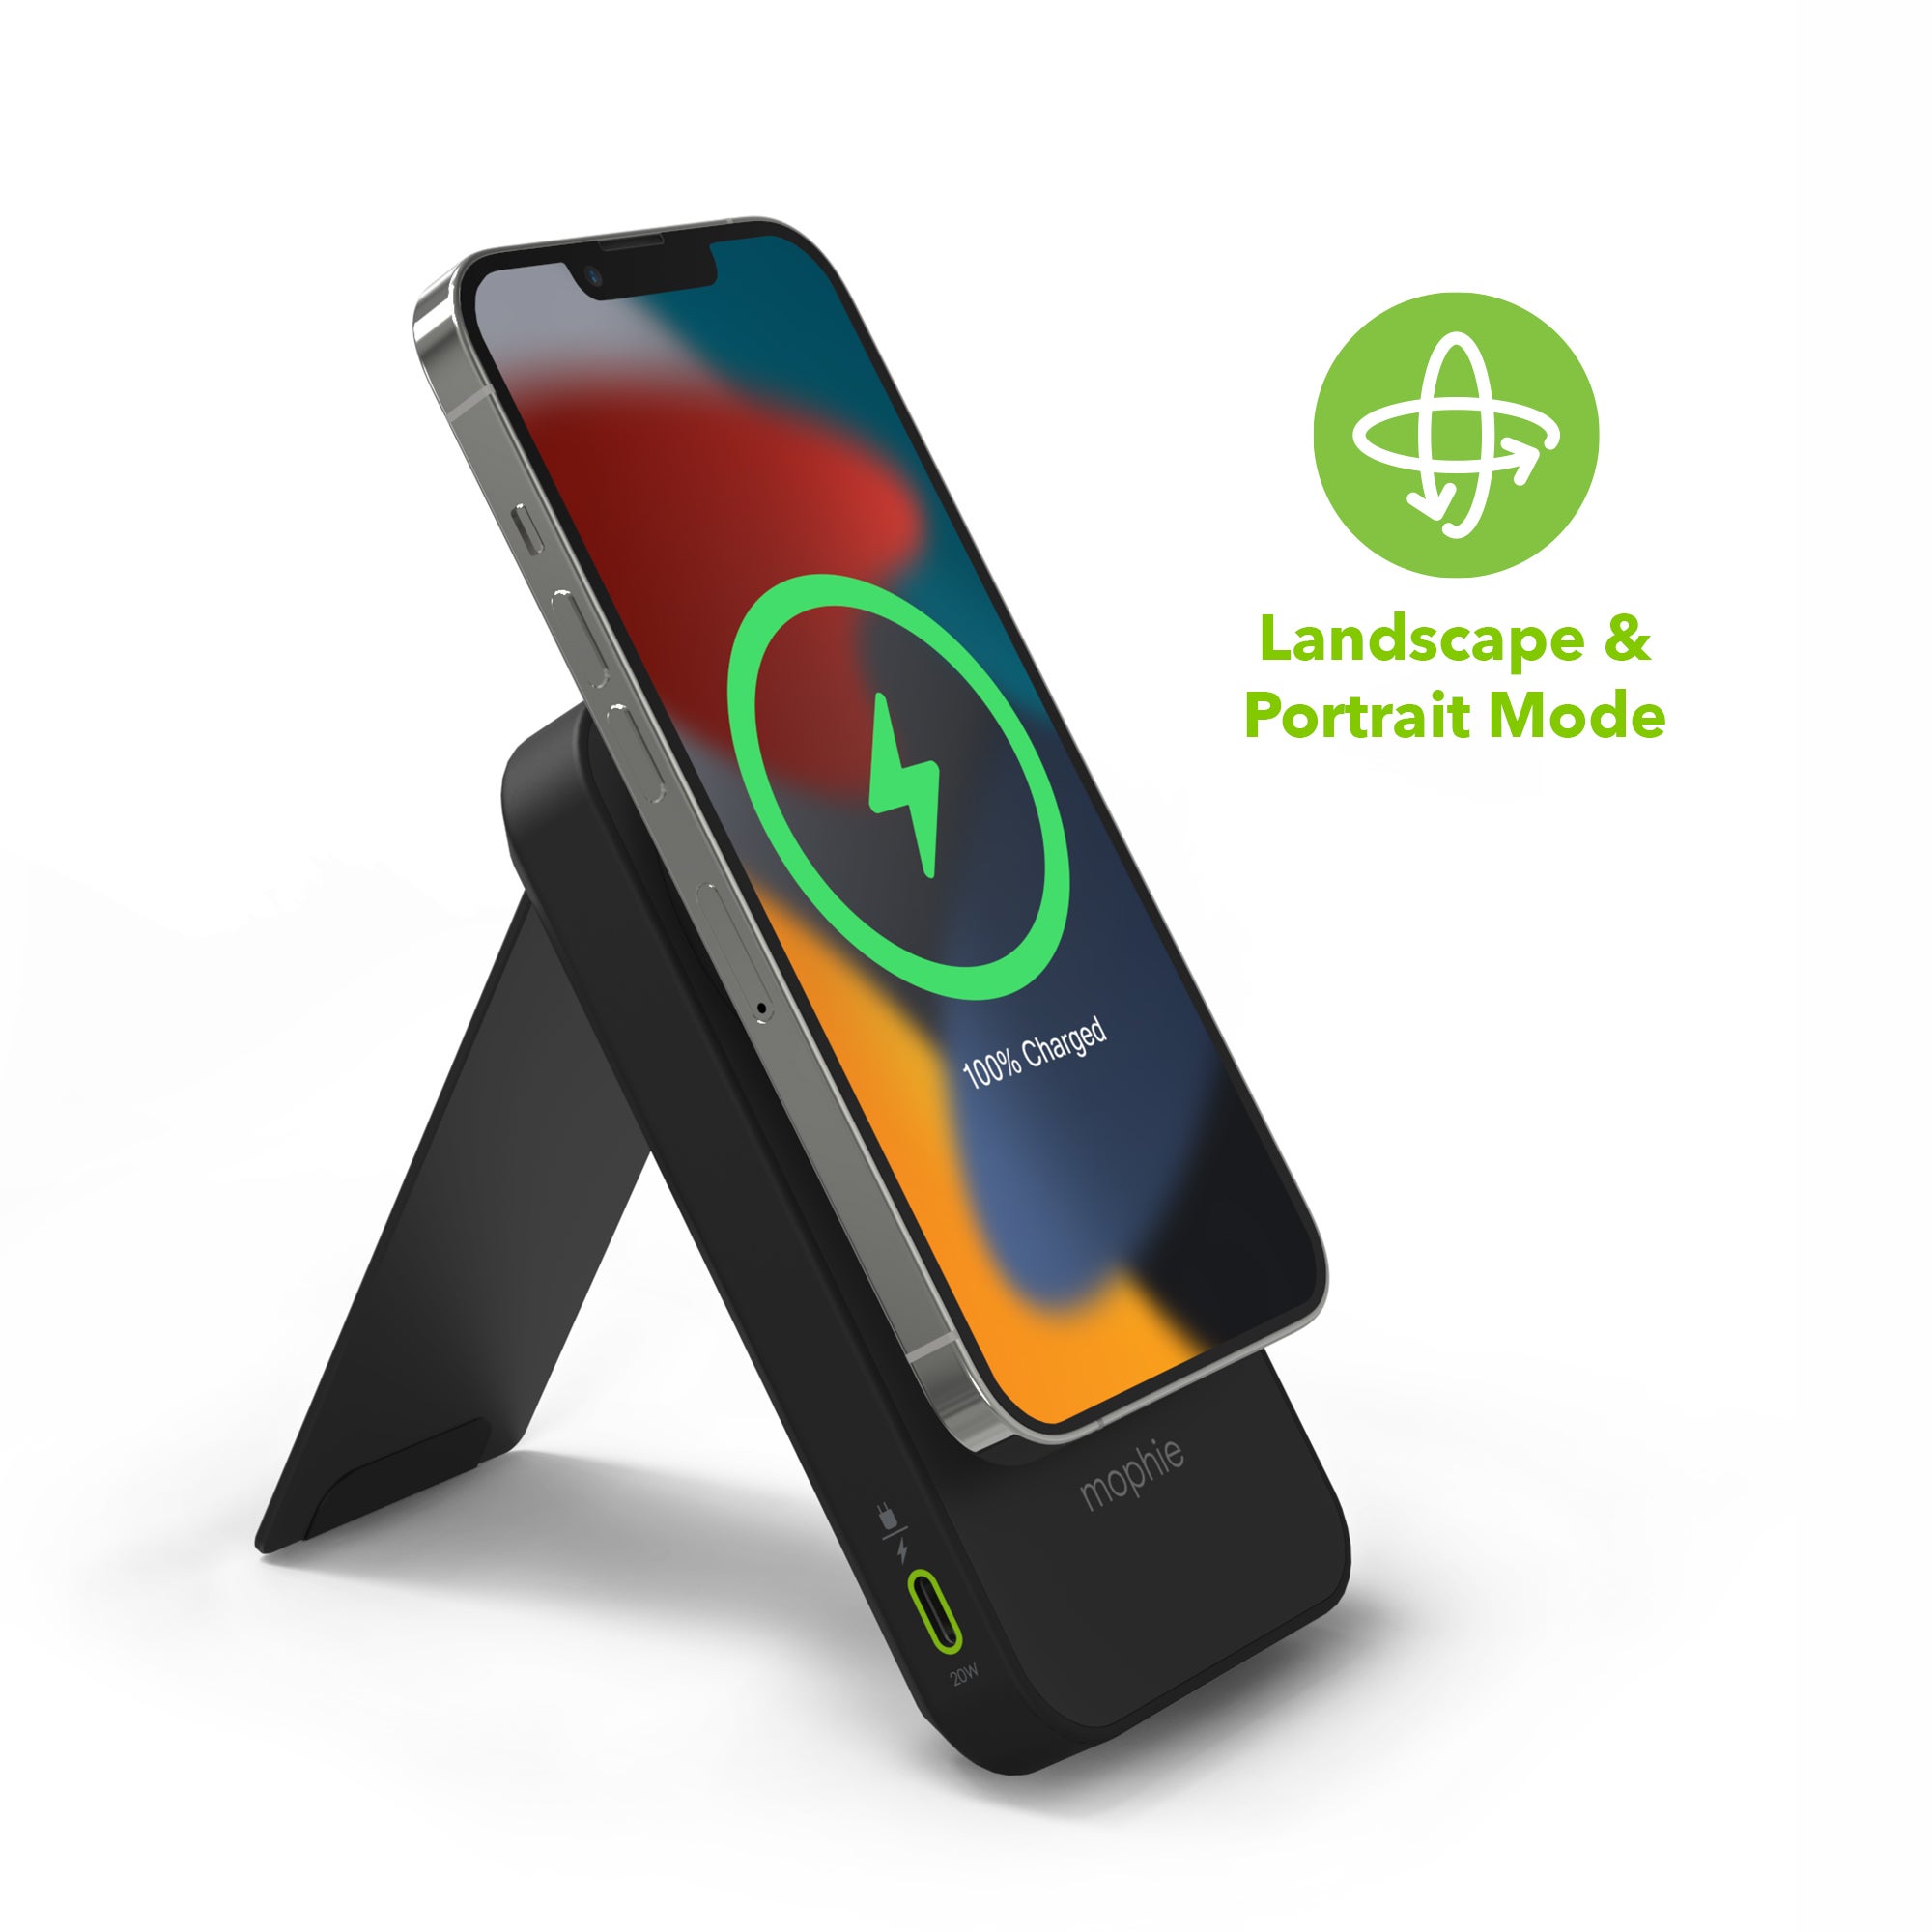 Landscape and Portrait Mode
||The stand holds your iPhone in landscape or portrait mode while it charges.